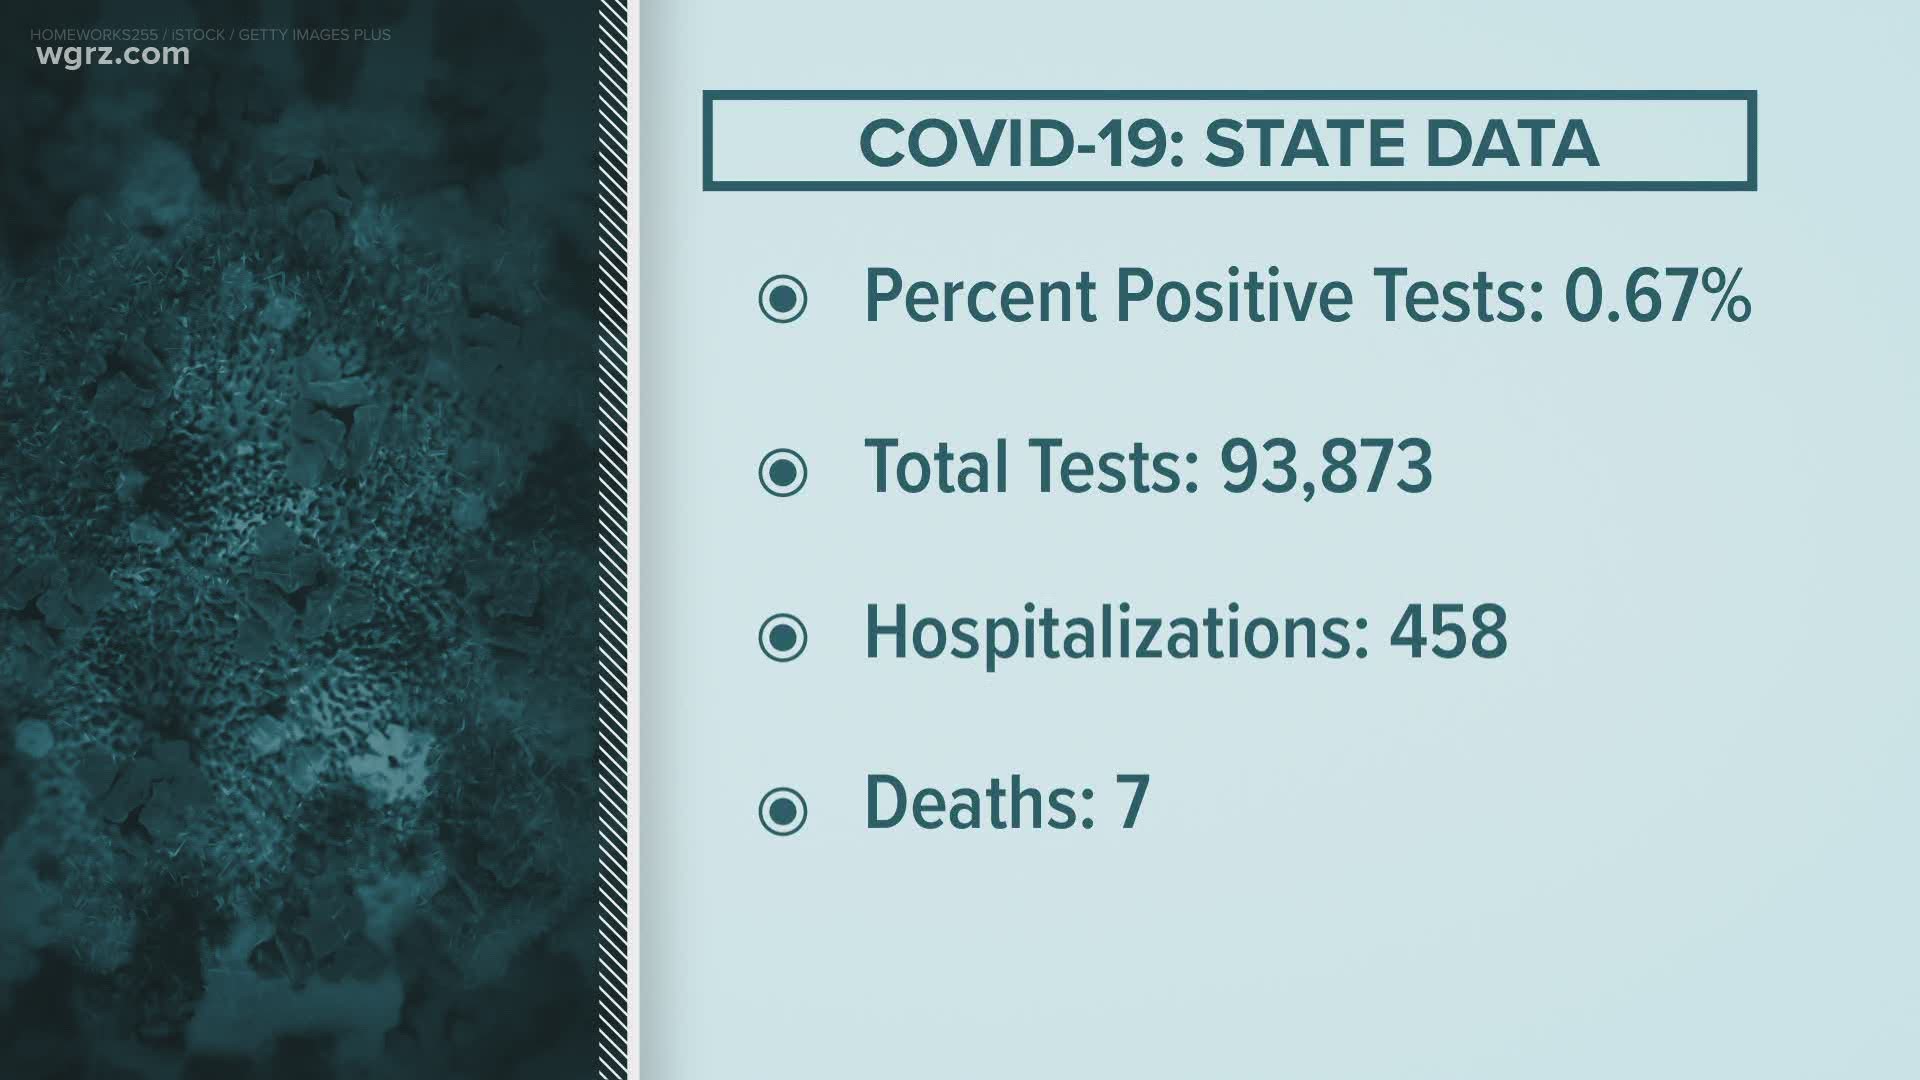 The percent positive cases staying low at 0.67 percent. Total tests were just under 94 thousand. Hospitalizations hit 458, a record low.